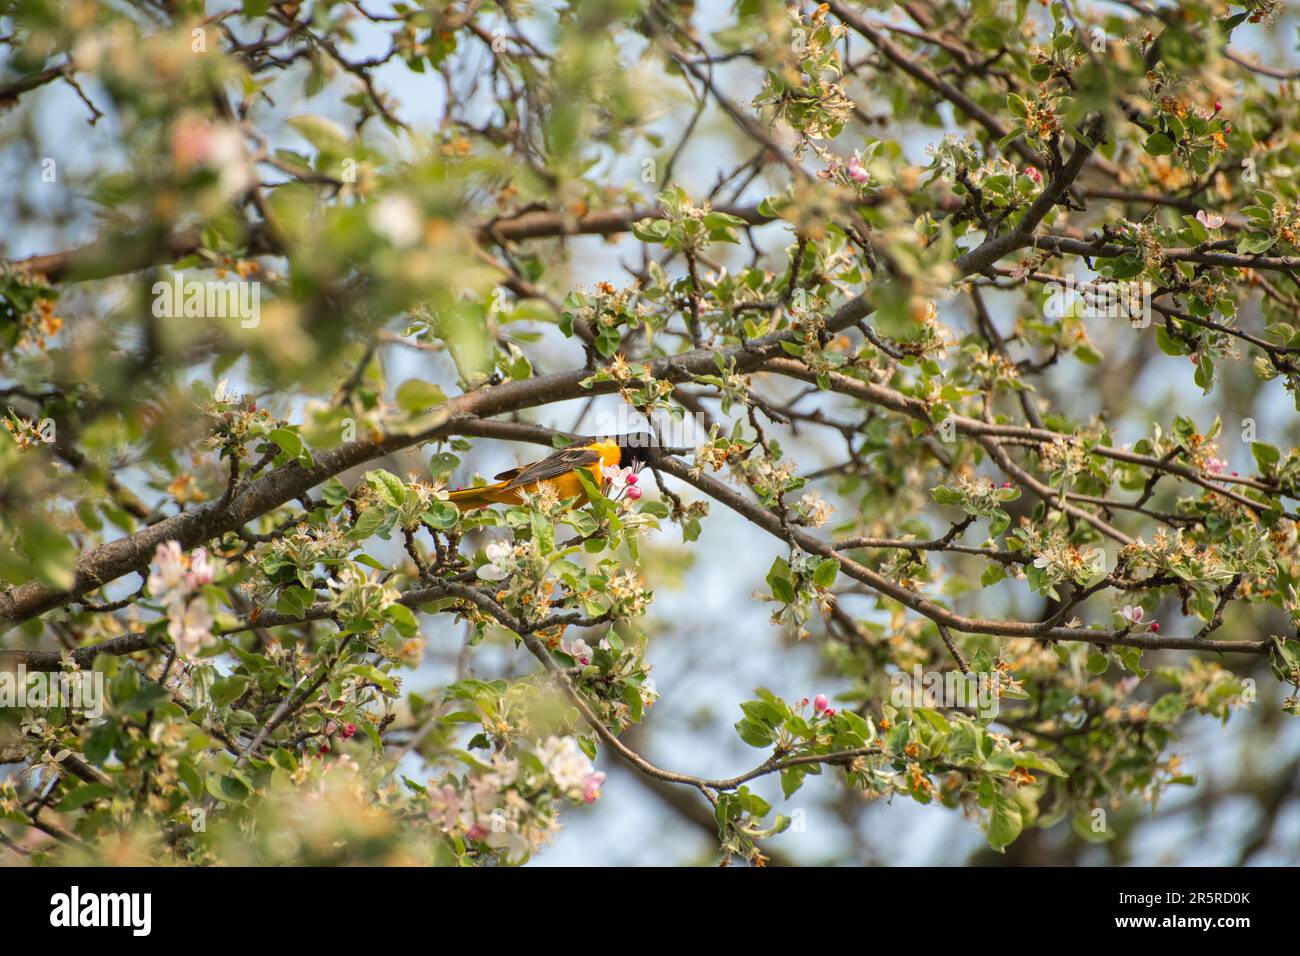 Balitmore oriole (Icterus galbula) bird perching on a blooming apple tree in spring, eating from apple blossoms Stock Photo